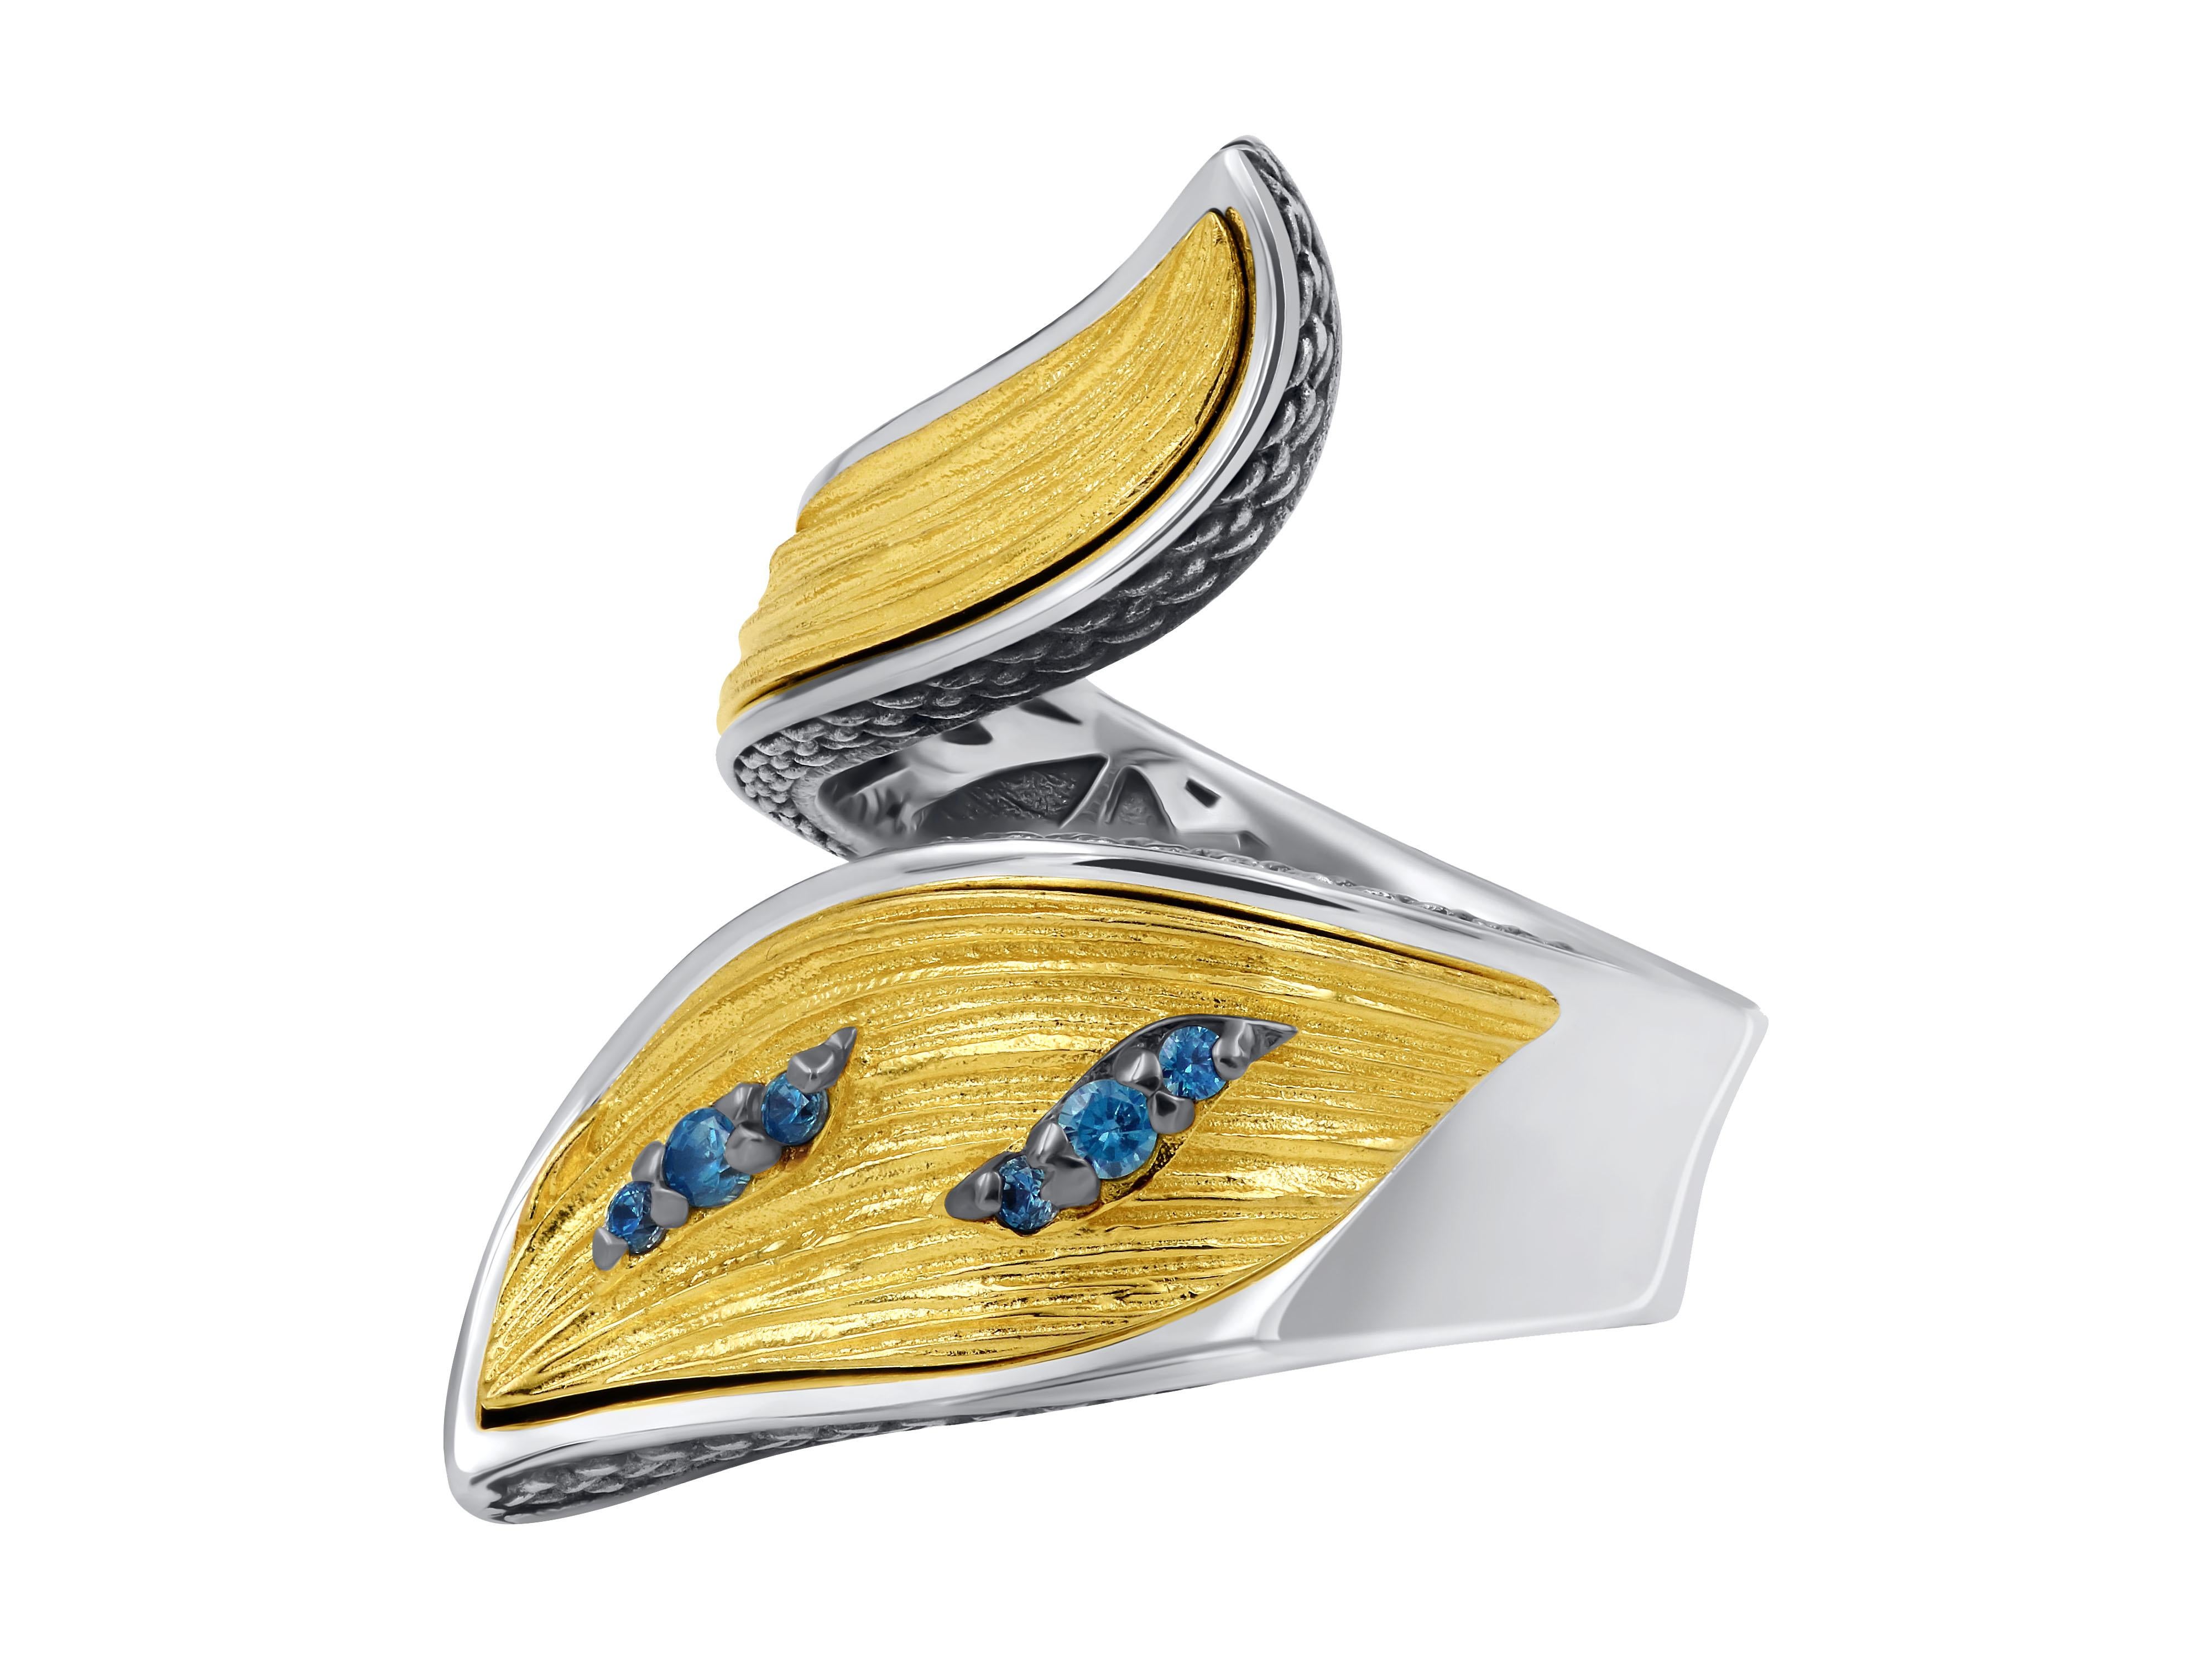 A silver two-tone ring, with a gold-plated textured surface and a beautiful blue topaz gemstone, offers a unique and elegant design. The ring features a mix of silver and gold tones, creating a striking contrast that adds to its overall beauty.
The